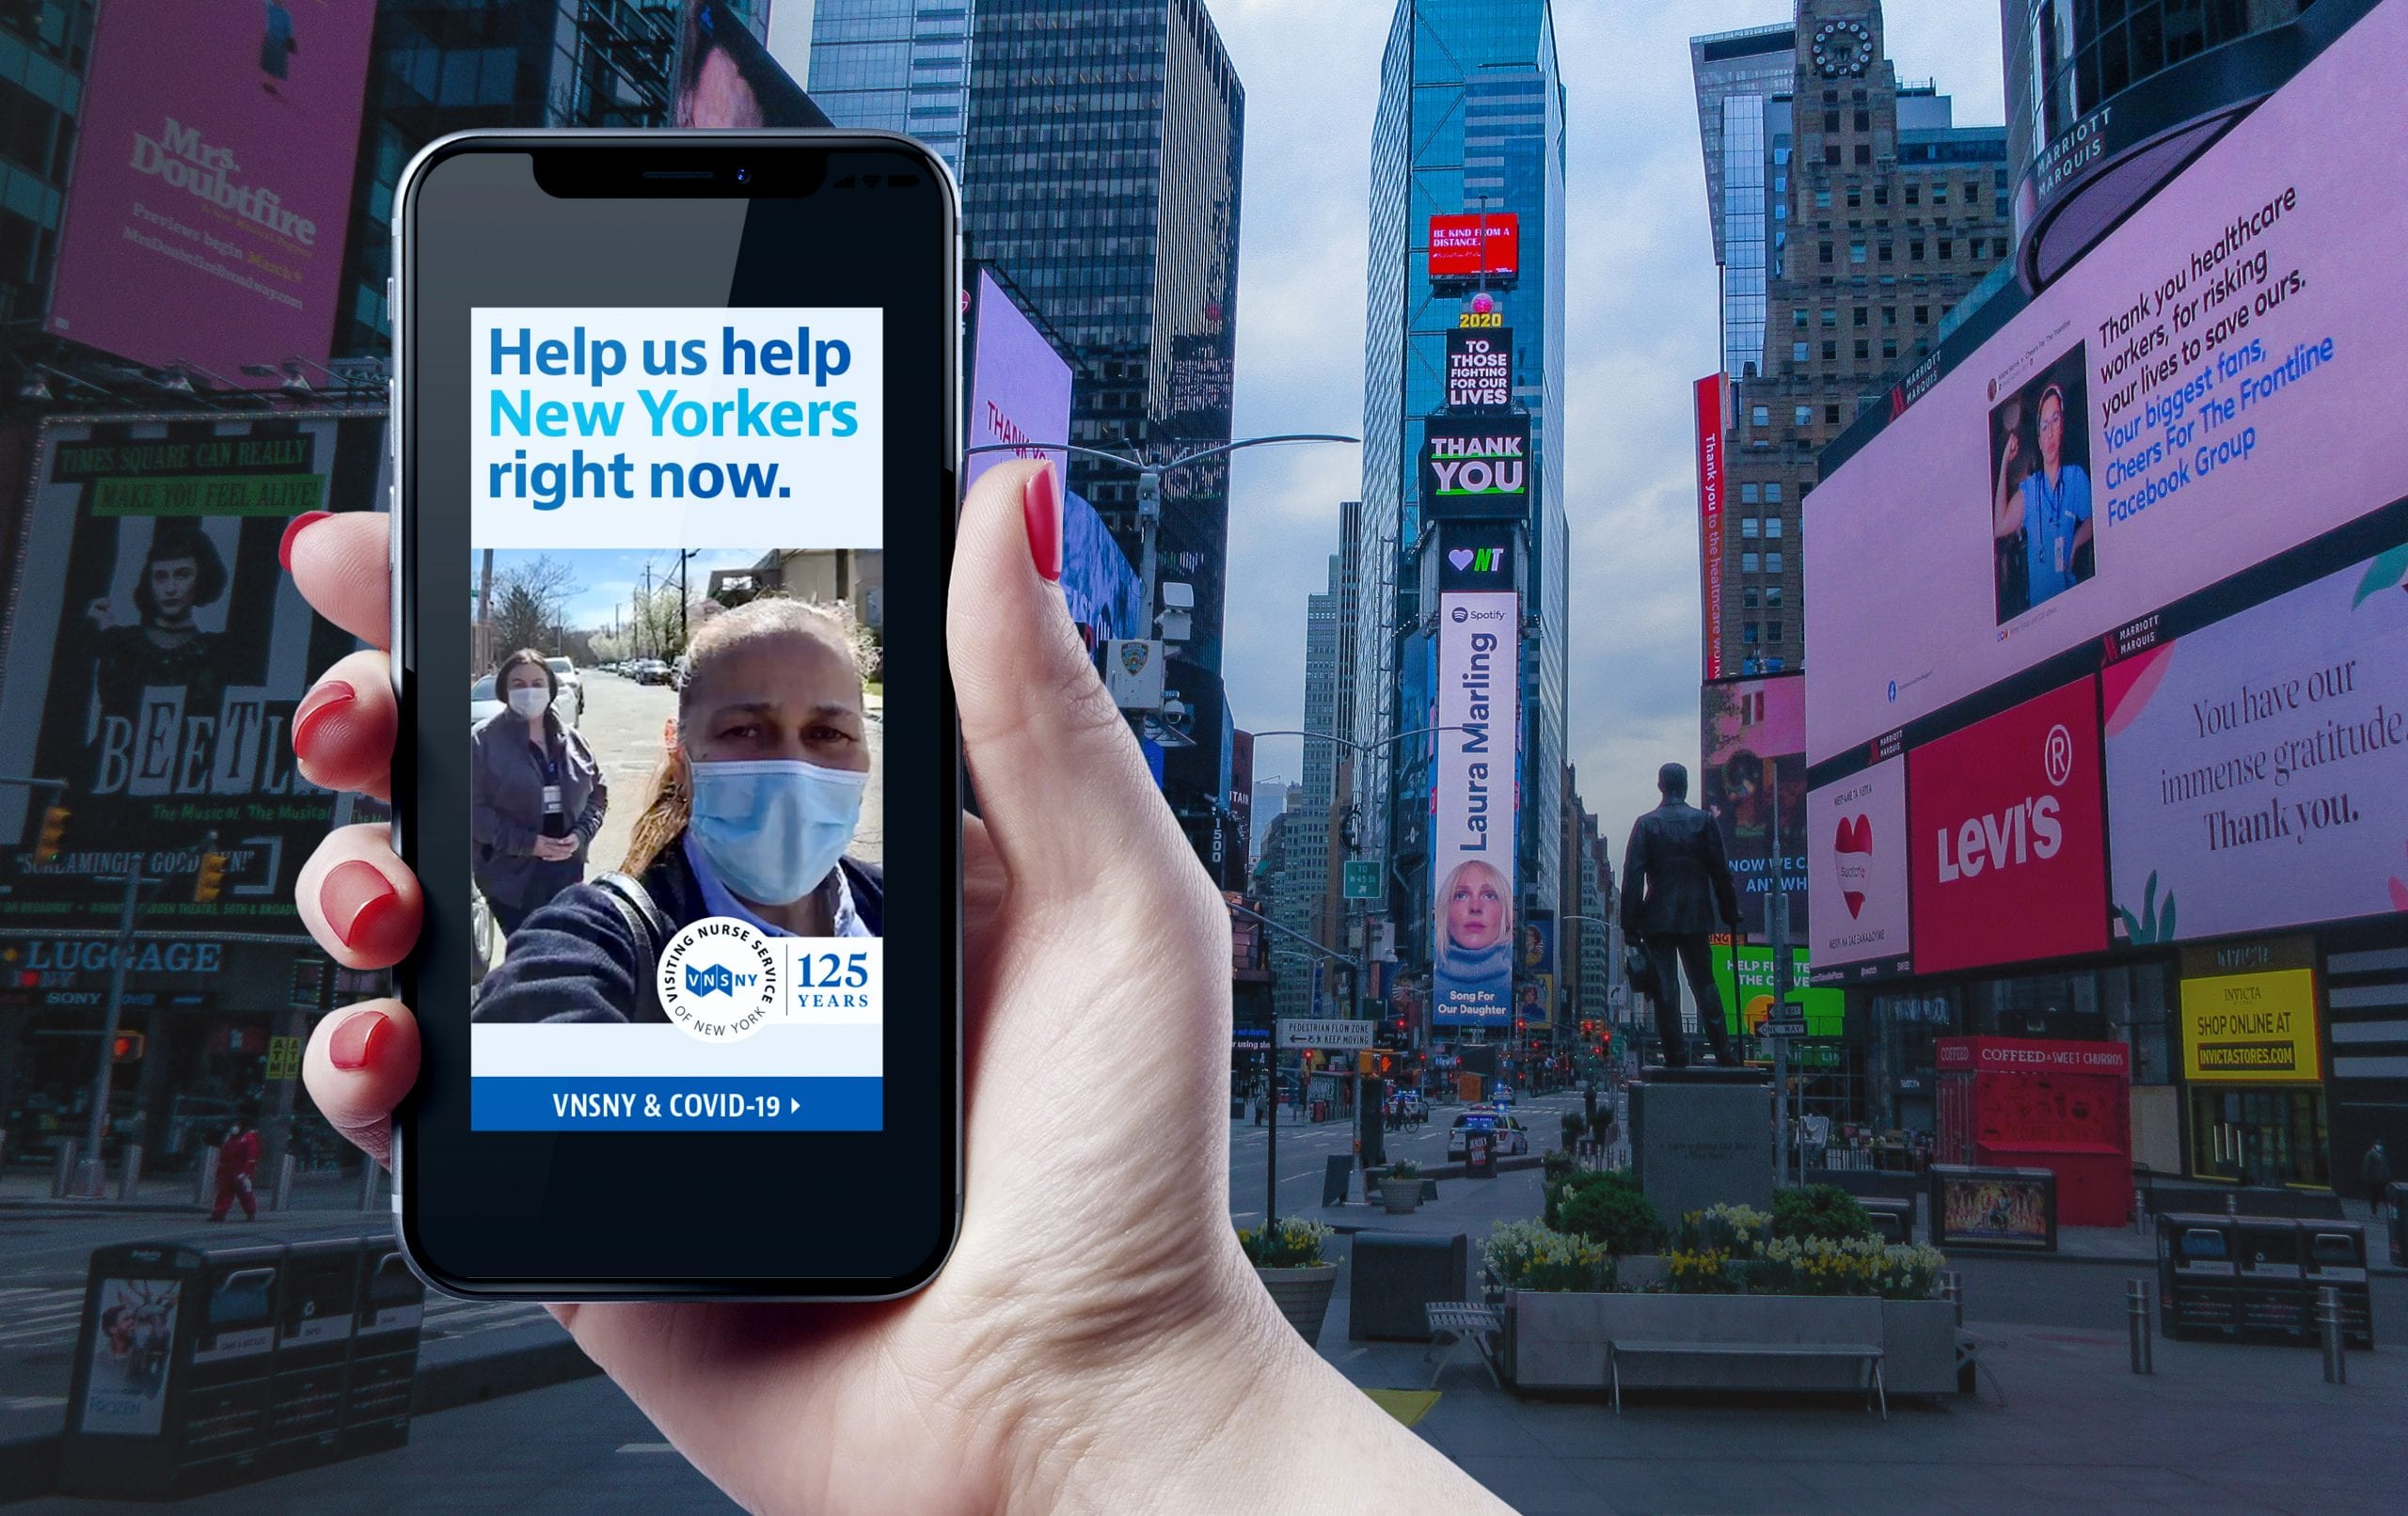 VNSNY Help us help vs Times Square